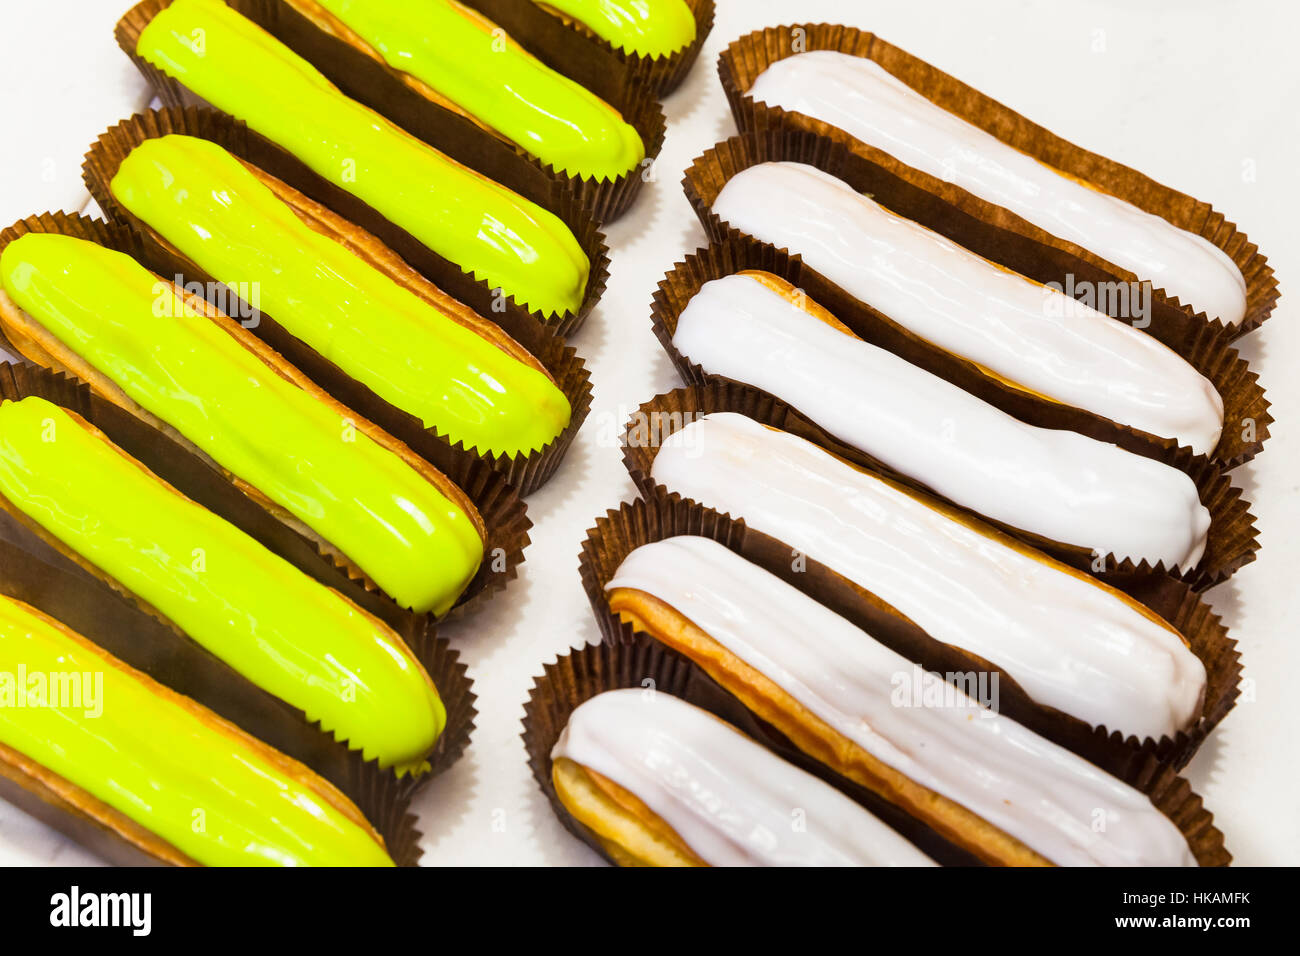 Rows of colorful eclairs, small, soft, log-shaped pastry filled with cream Stock Photo